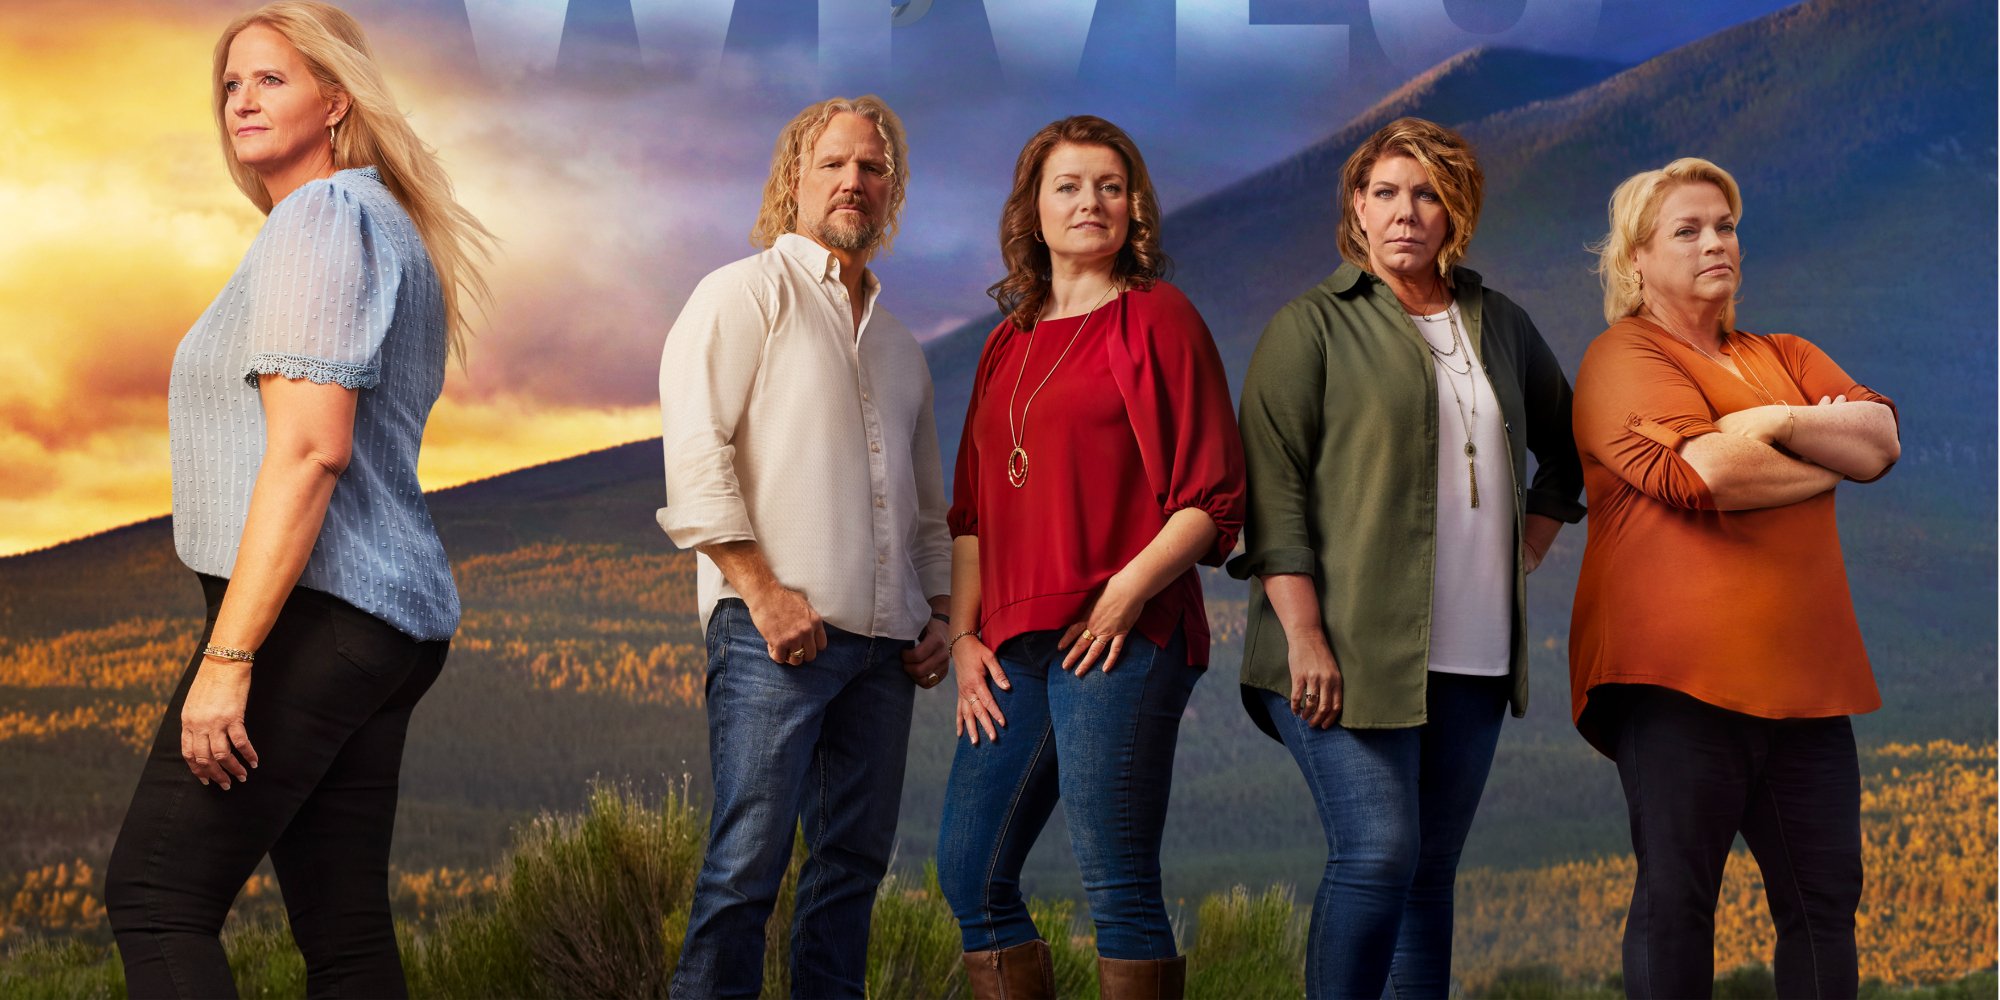 ‘Sister Wives’ Fans Warn Janelle Brown to ‘Run’  as Marriage to Kody Brown Appears to go Downhill in Season 17